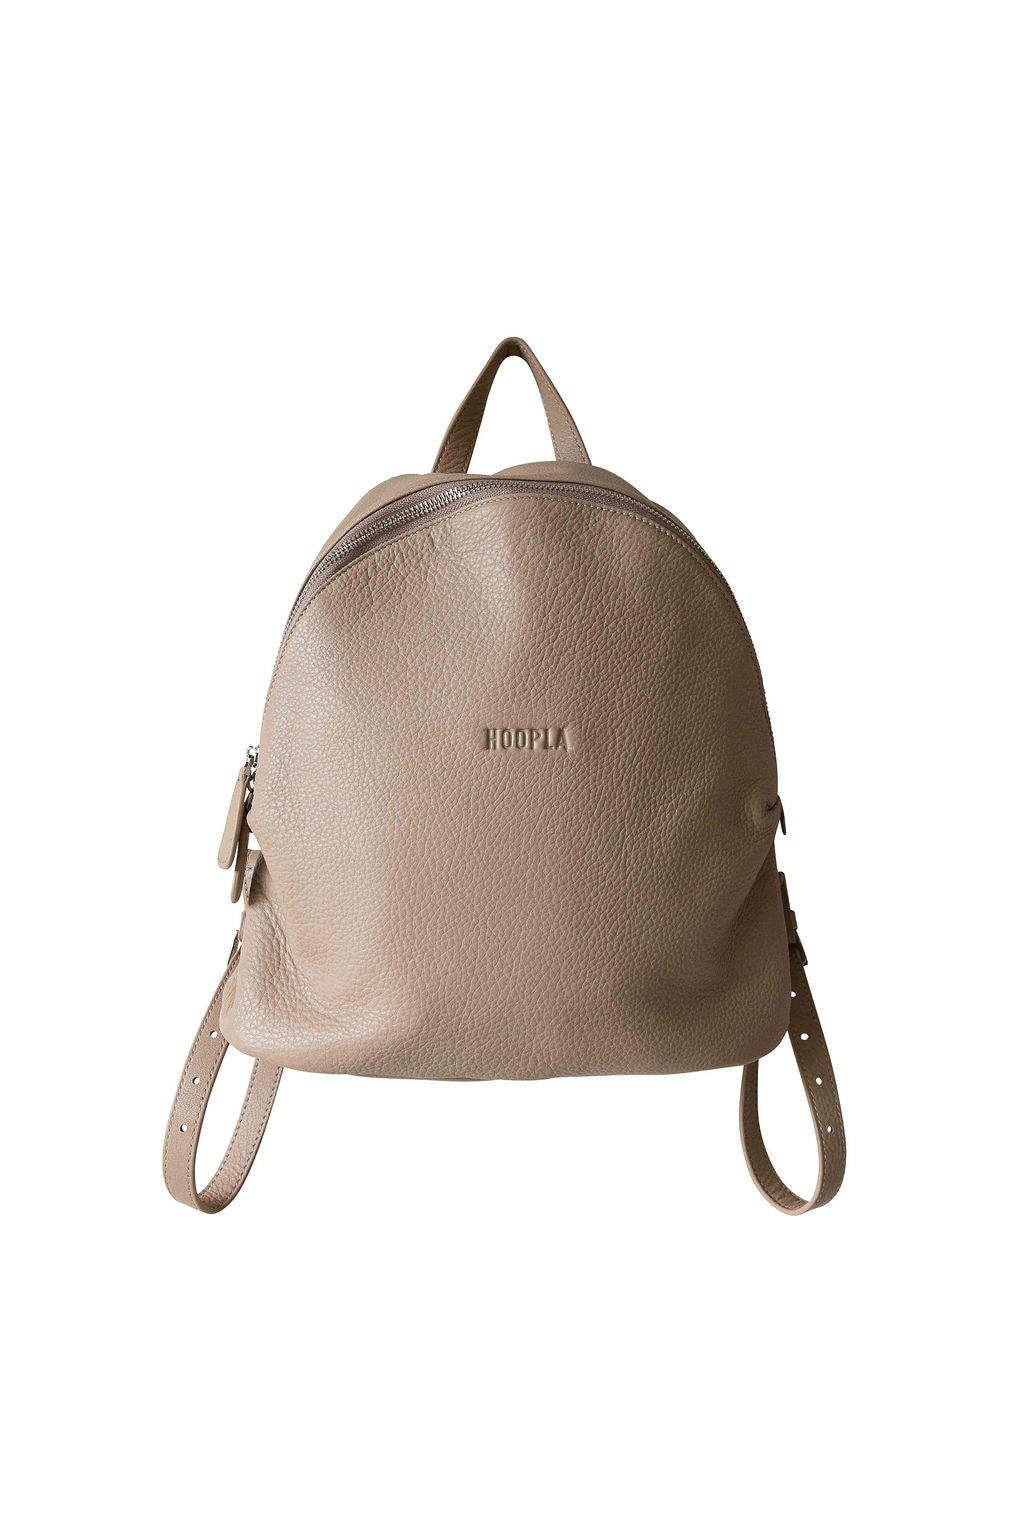 Front view of tan, pebbled leather, hoopla backpack. Showing double zips with leather zip tags and small handle on top of pack for ease of carrying. 